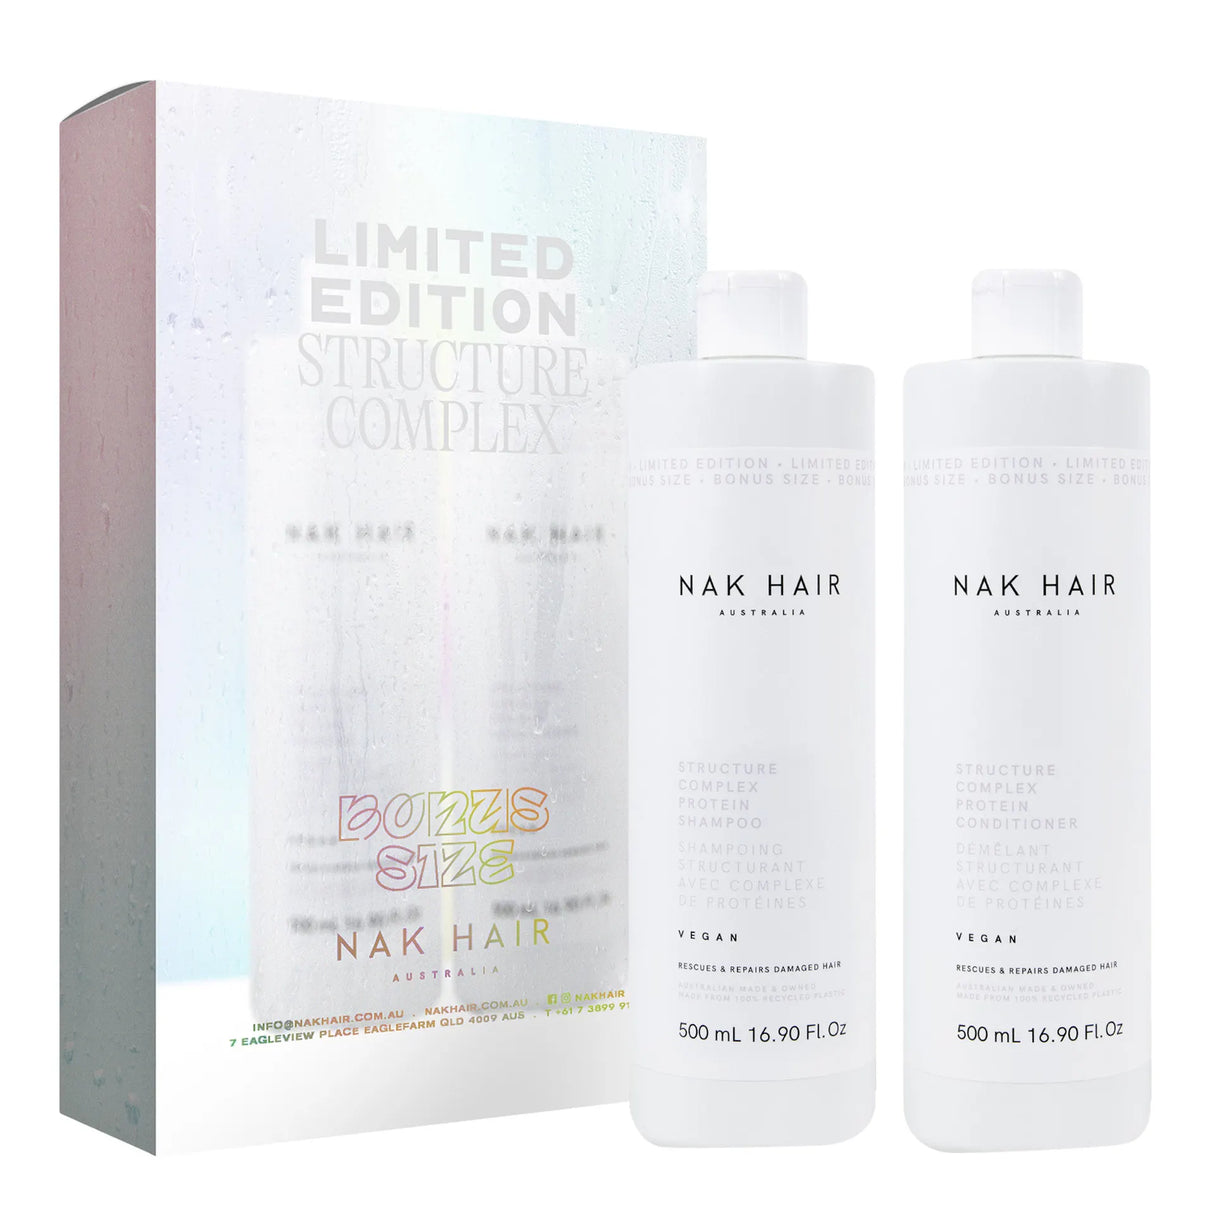 Nak Hair Structure Complex Shampoo and Conditioner 500ml Duo Pack